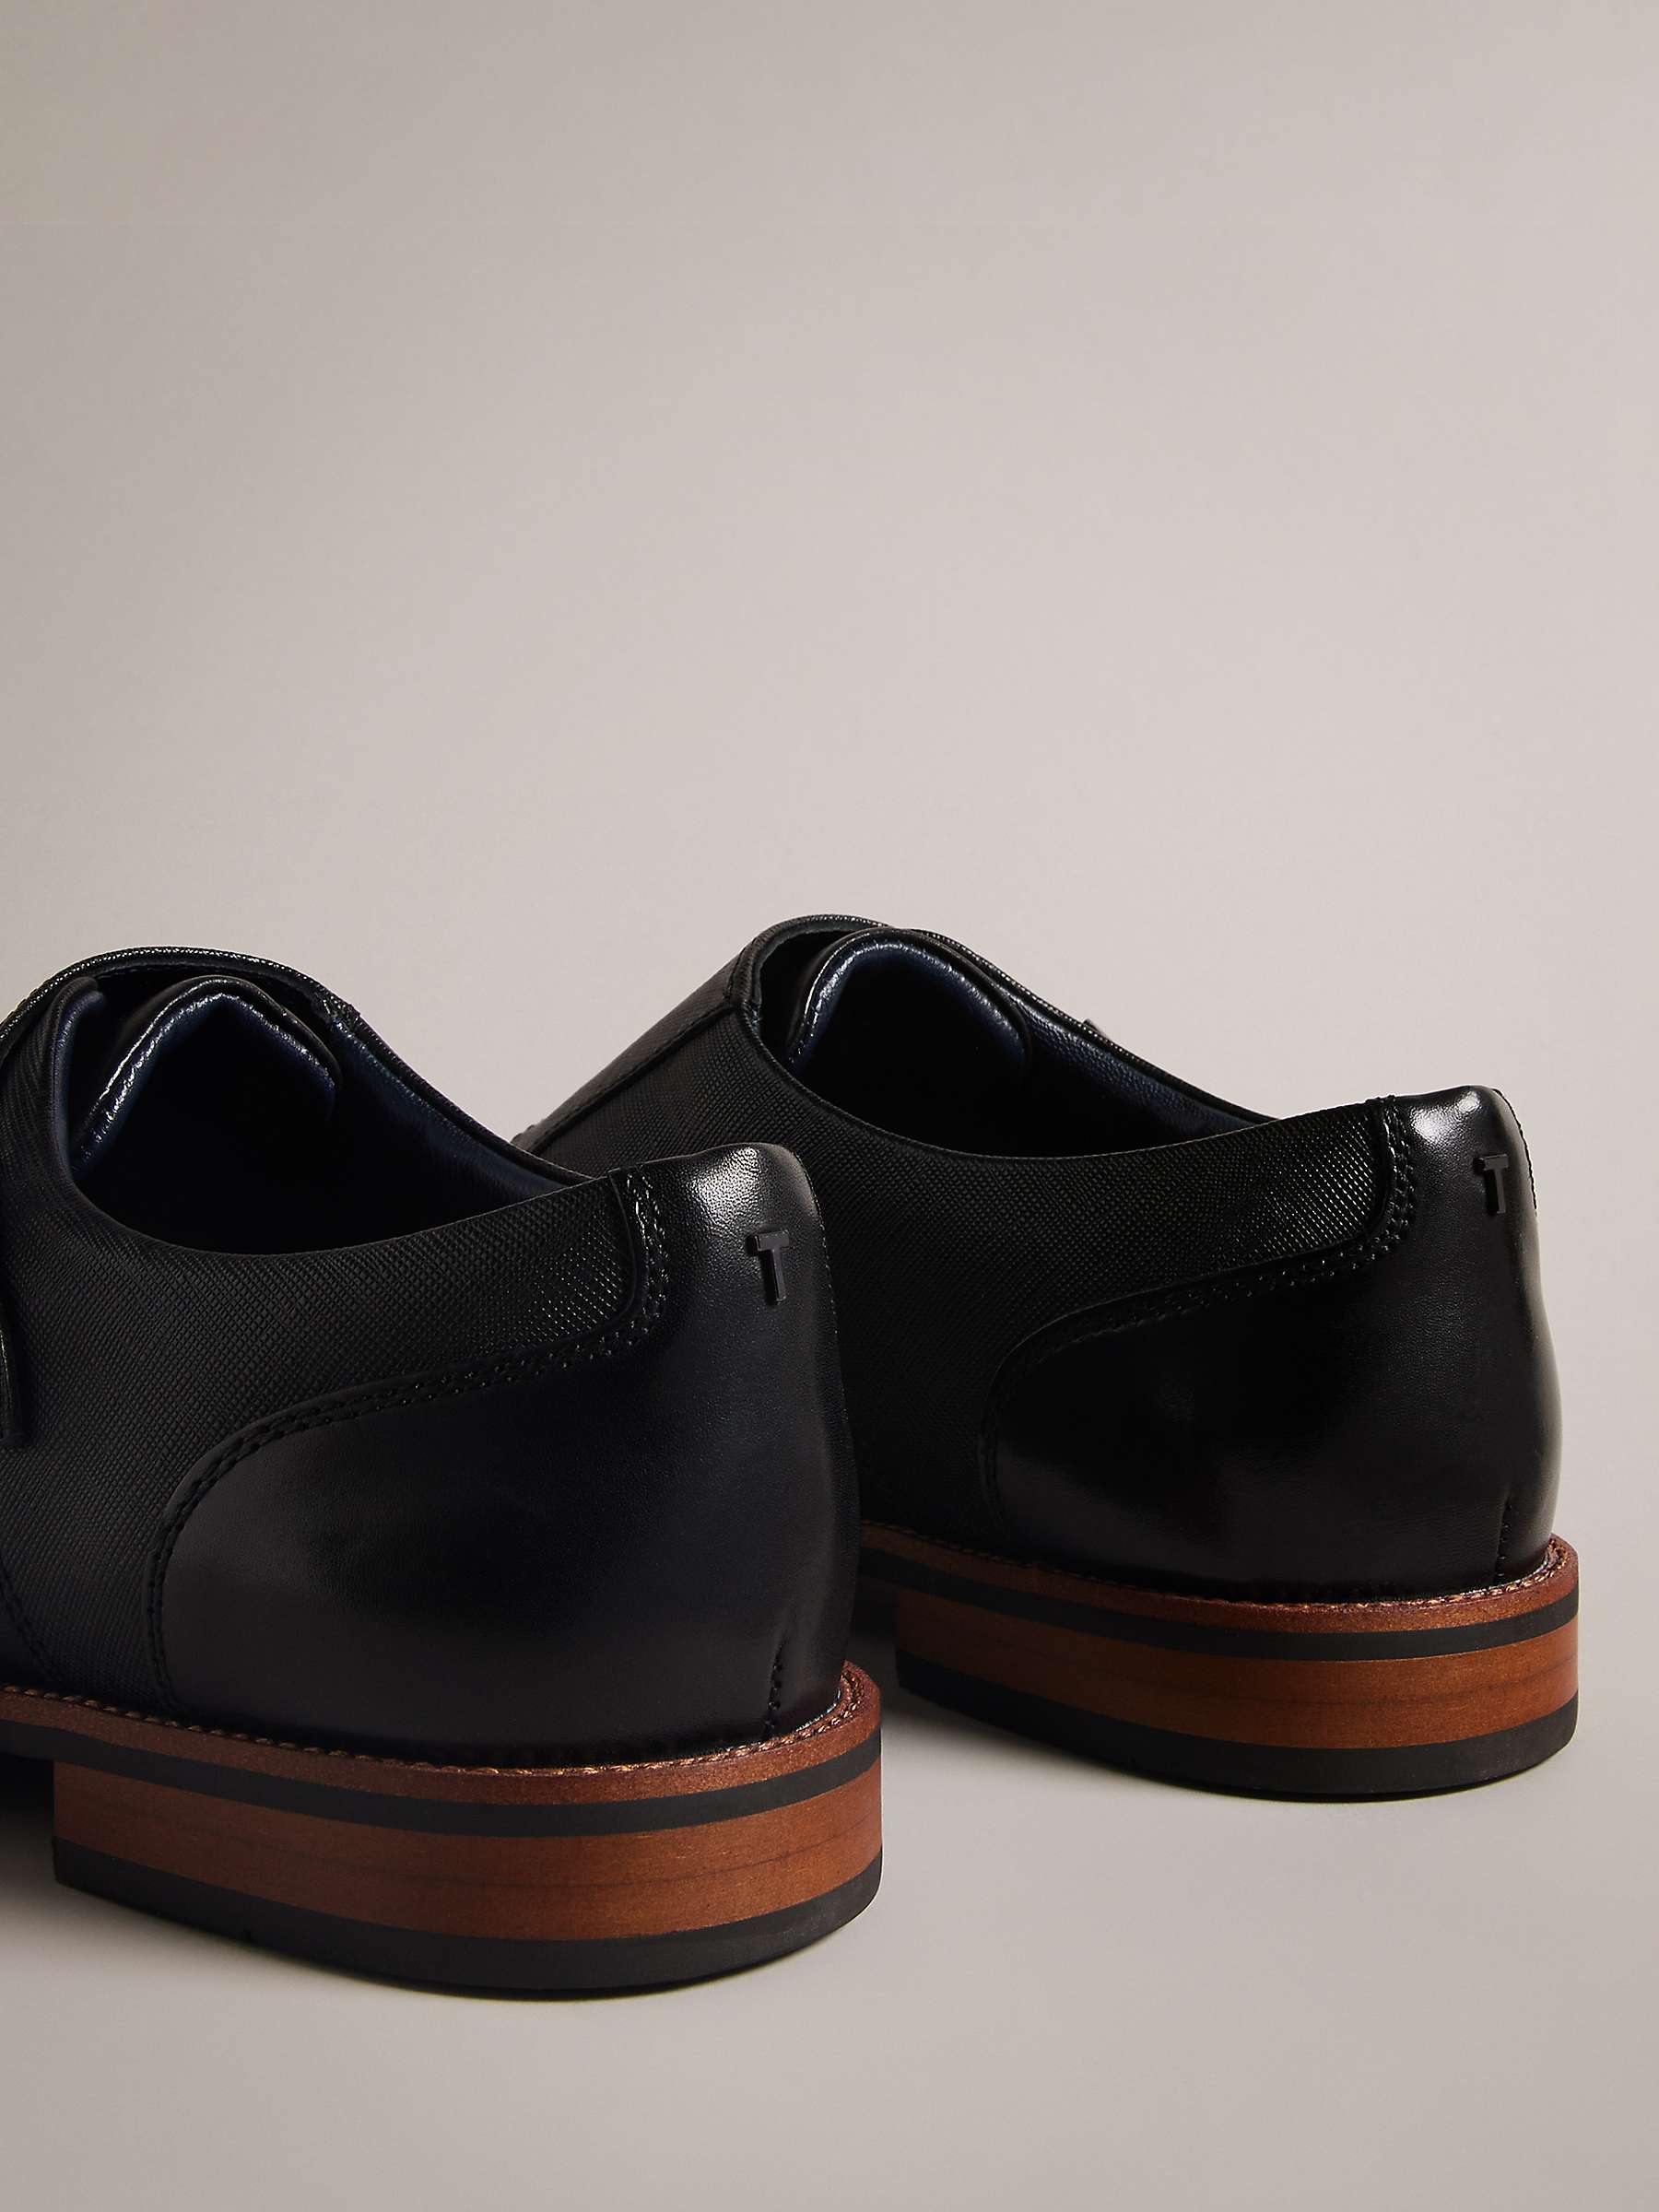 Buy Ted Baker Alicott Double Monk Leather Shoes, Black Online at johnlewis.com